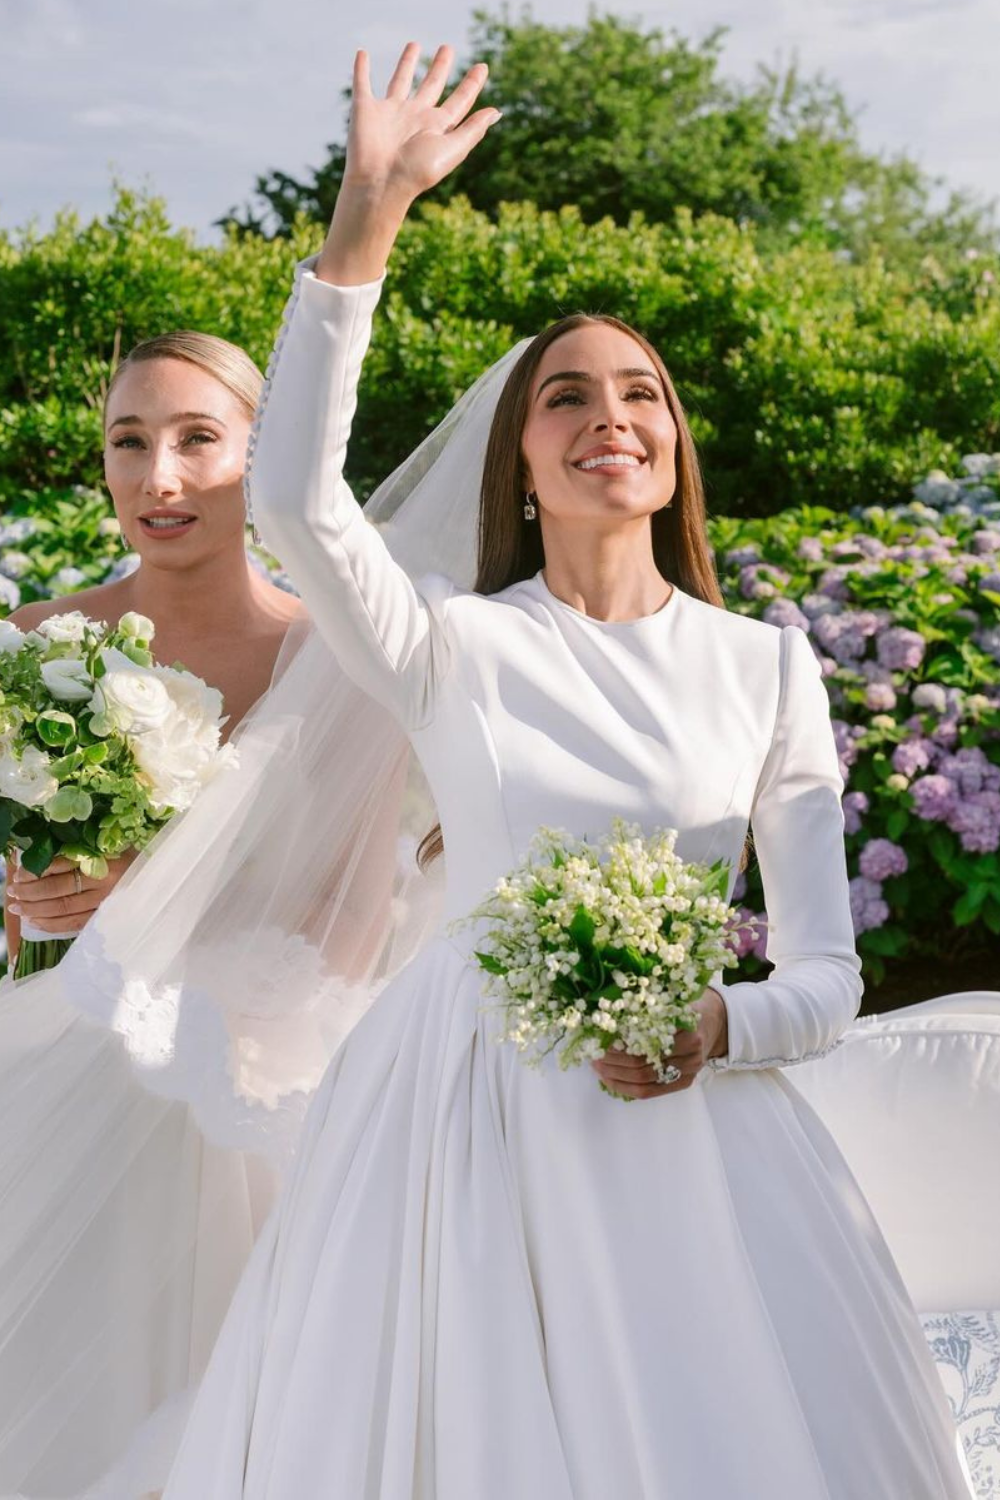 Olivia Culpo, wedding dress, modest gown, bridal fashion, Dolce & Gabbana, Miss Universe, controversy, debate, social media, fashion critics, modesty, marriage, beauty standards, individuality, bridal trends, long-sleeved, high-neck.